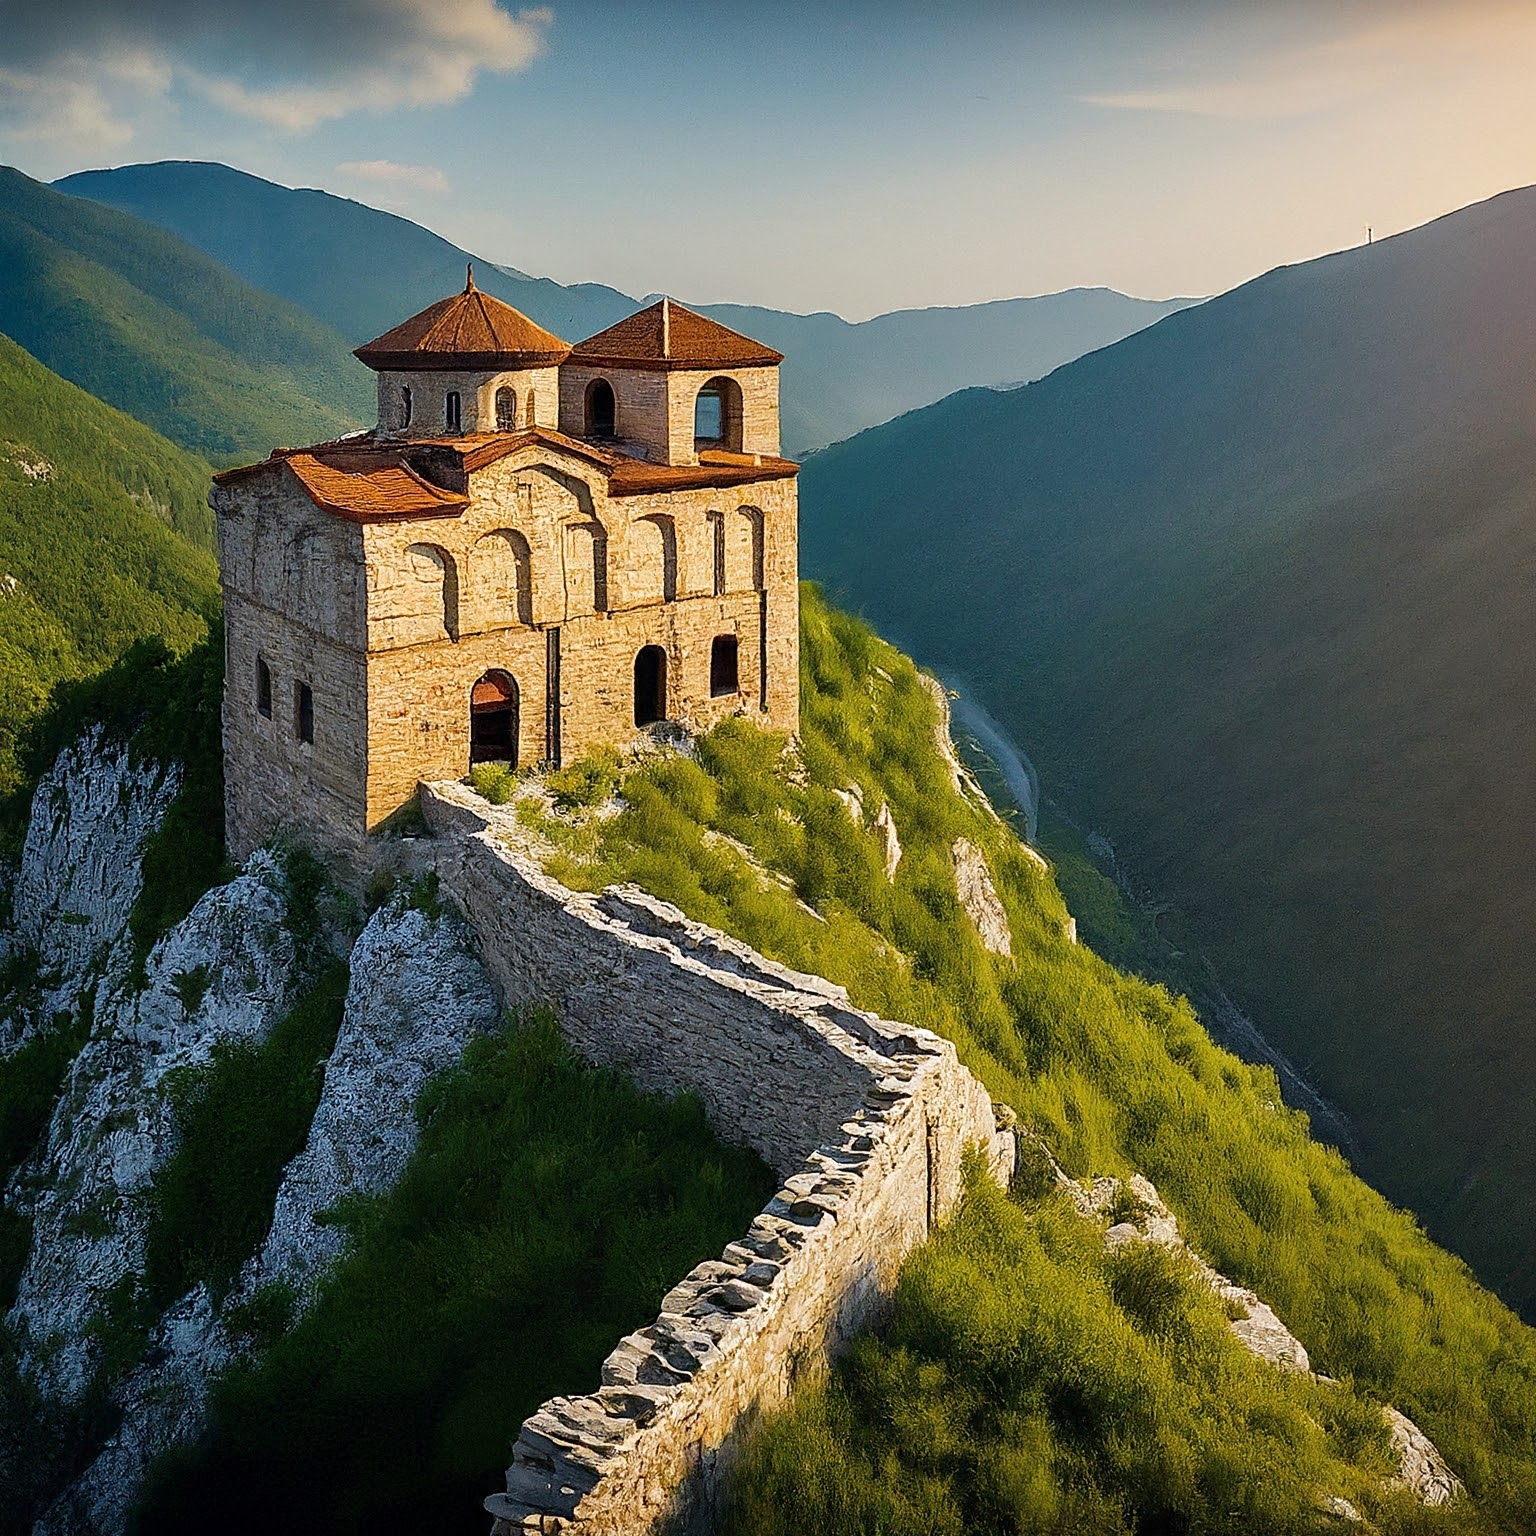 Asen’s Fortress, Bulgaria, perched on a clifftop overlooking a valley at sunset.